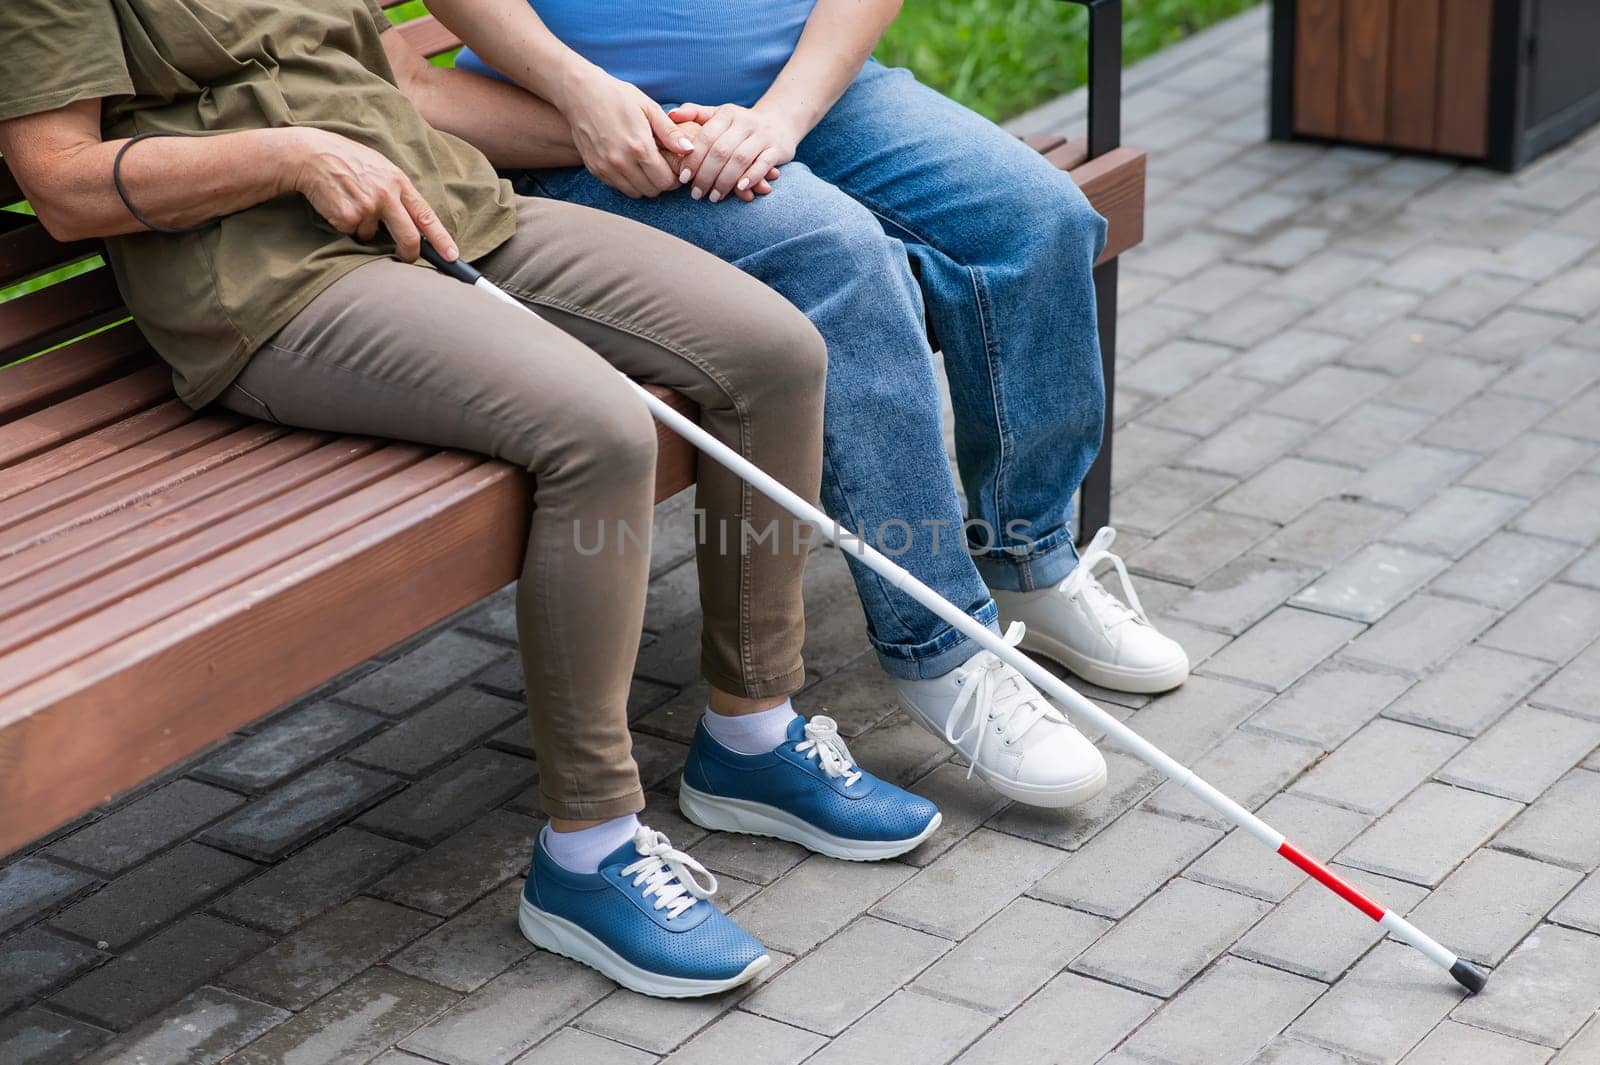 An elderly blind woman and her pregnant daughter are sitting on a bench in the park. Close up legs